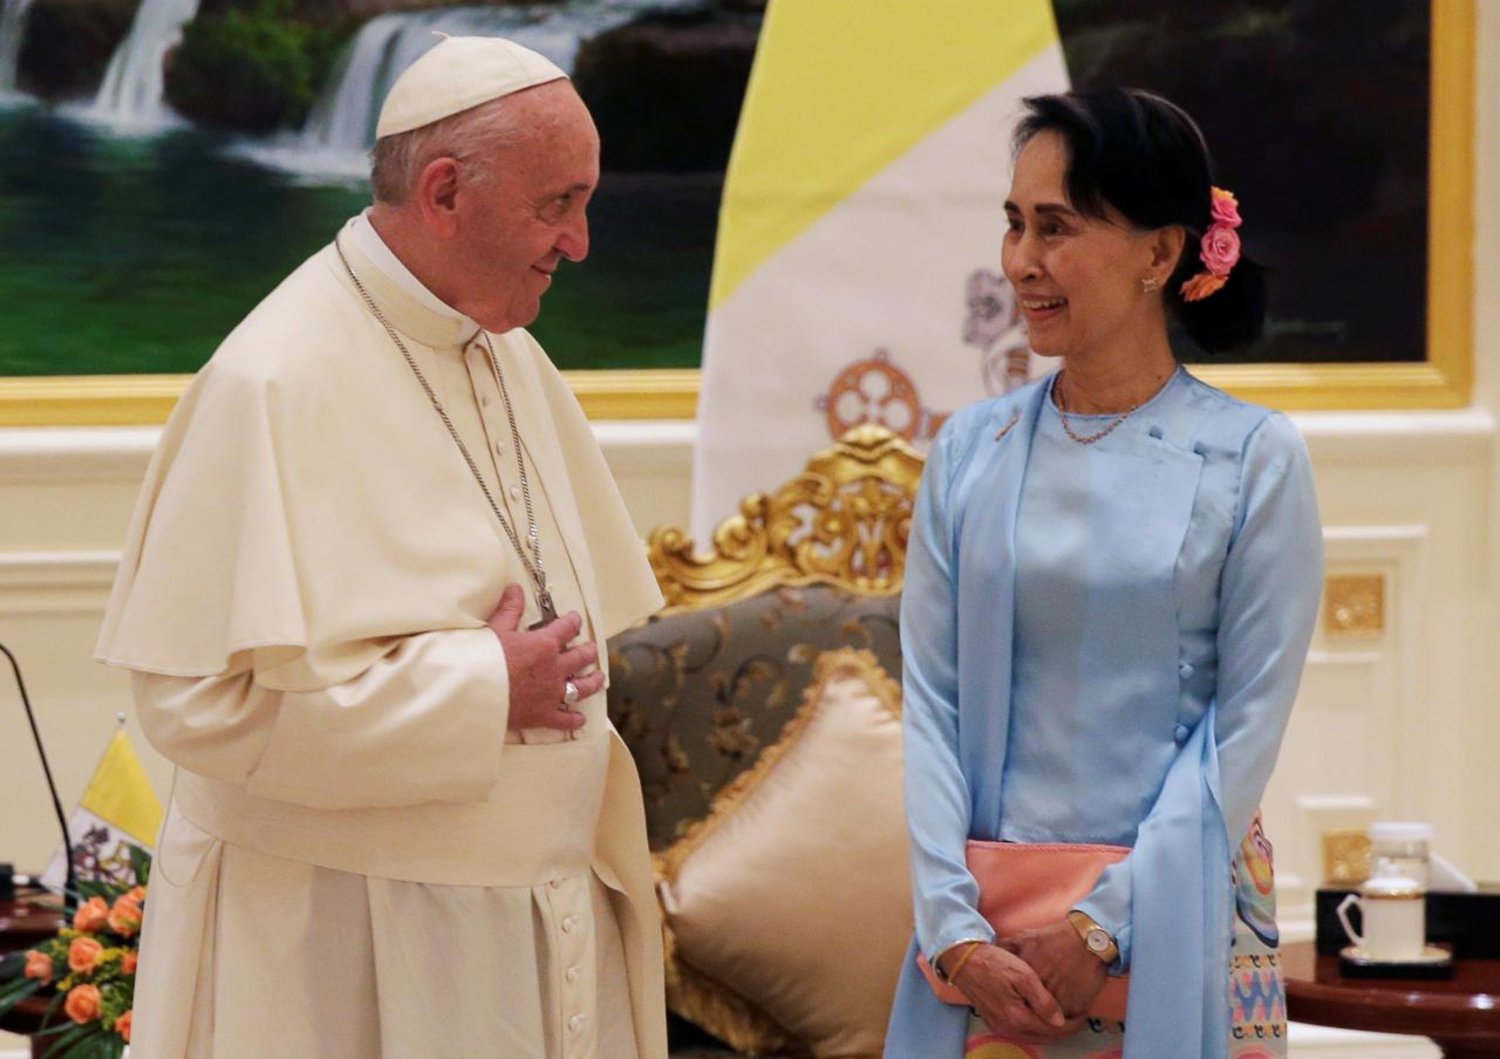 Pope Francis meets Myanmar's State Counsellor Aung San Suu Kyi in Naypyitaw, Myanmar November 28, 2017. REUTERS/Max Rossi